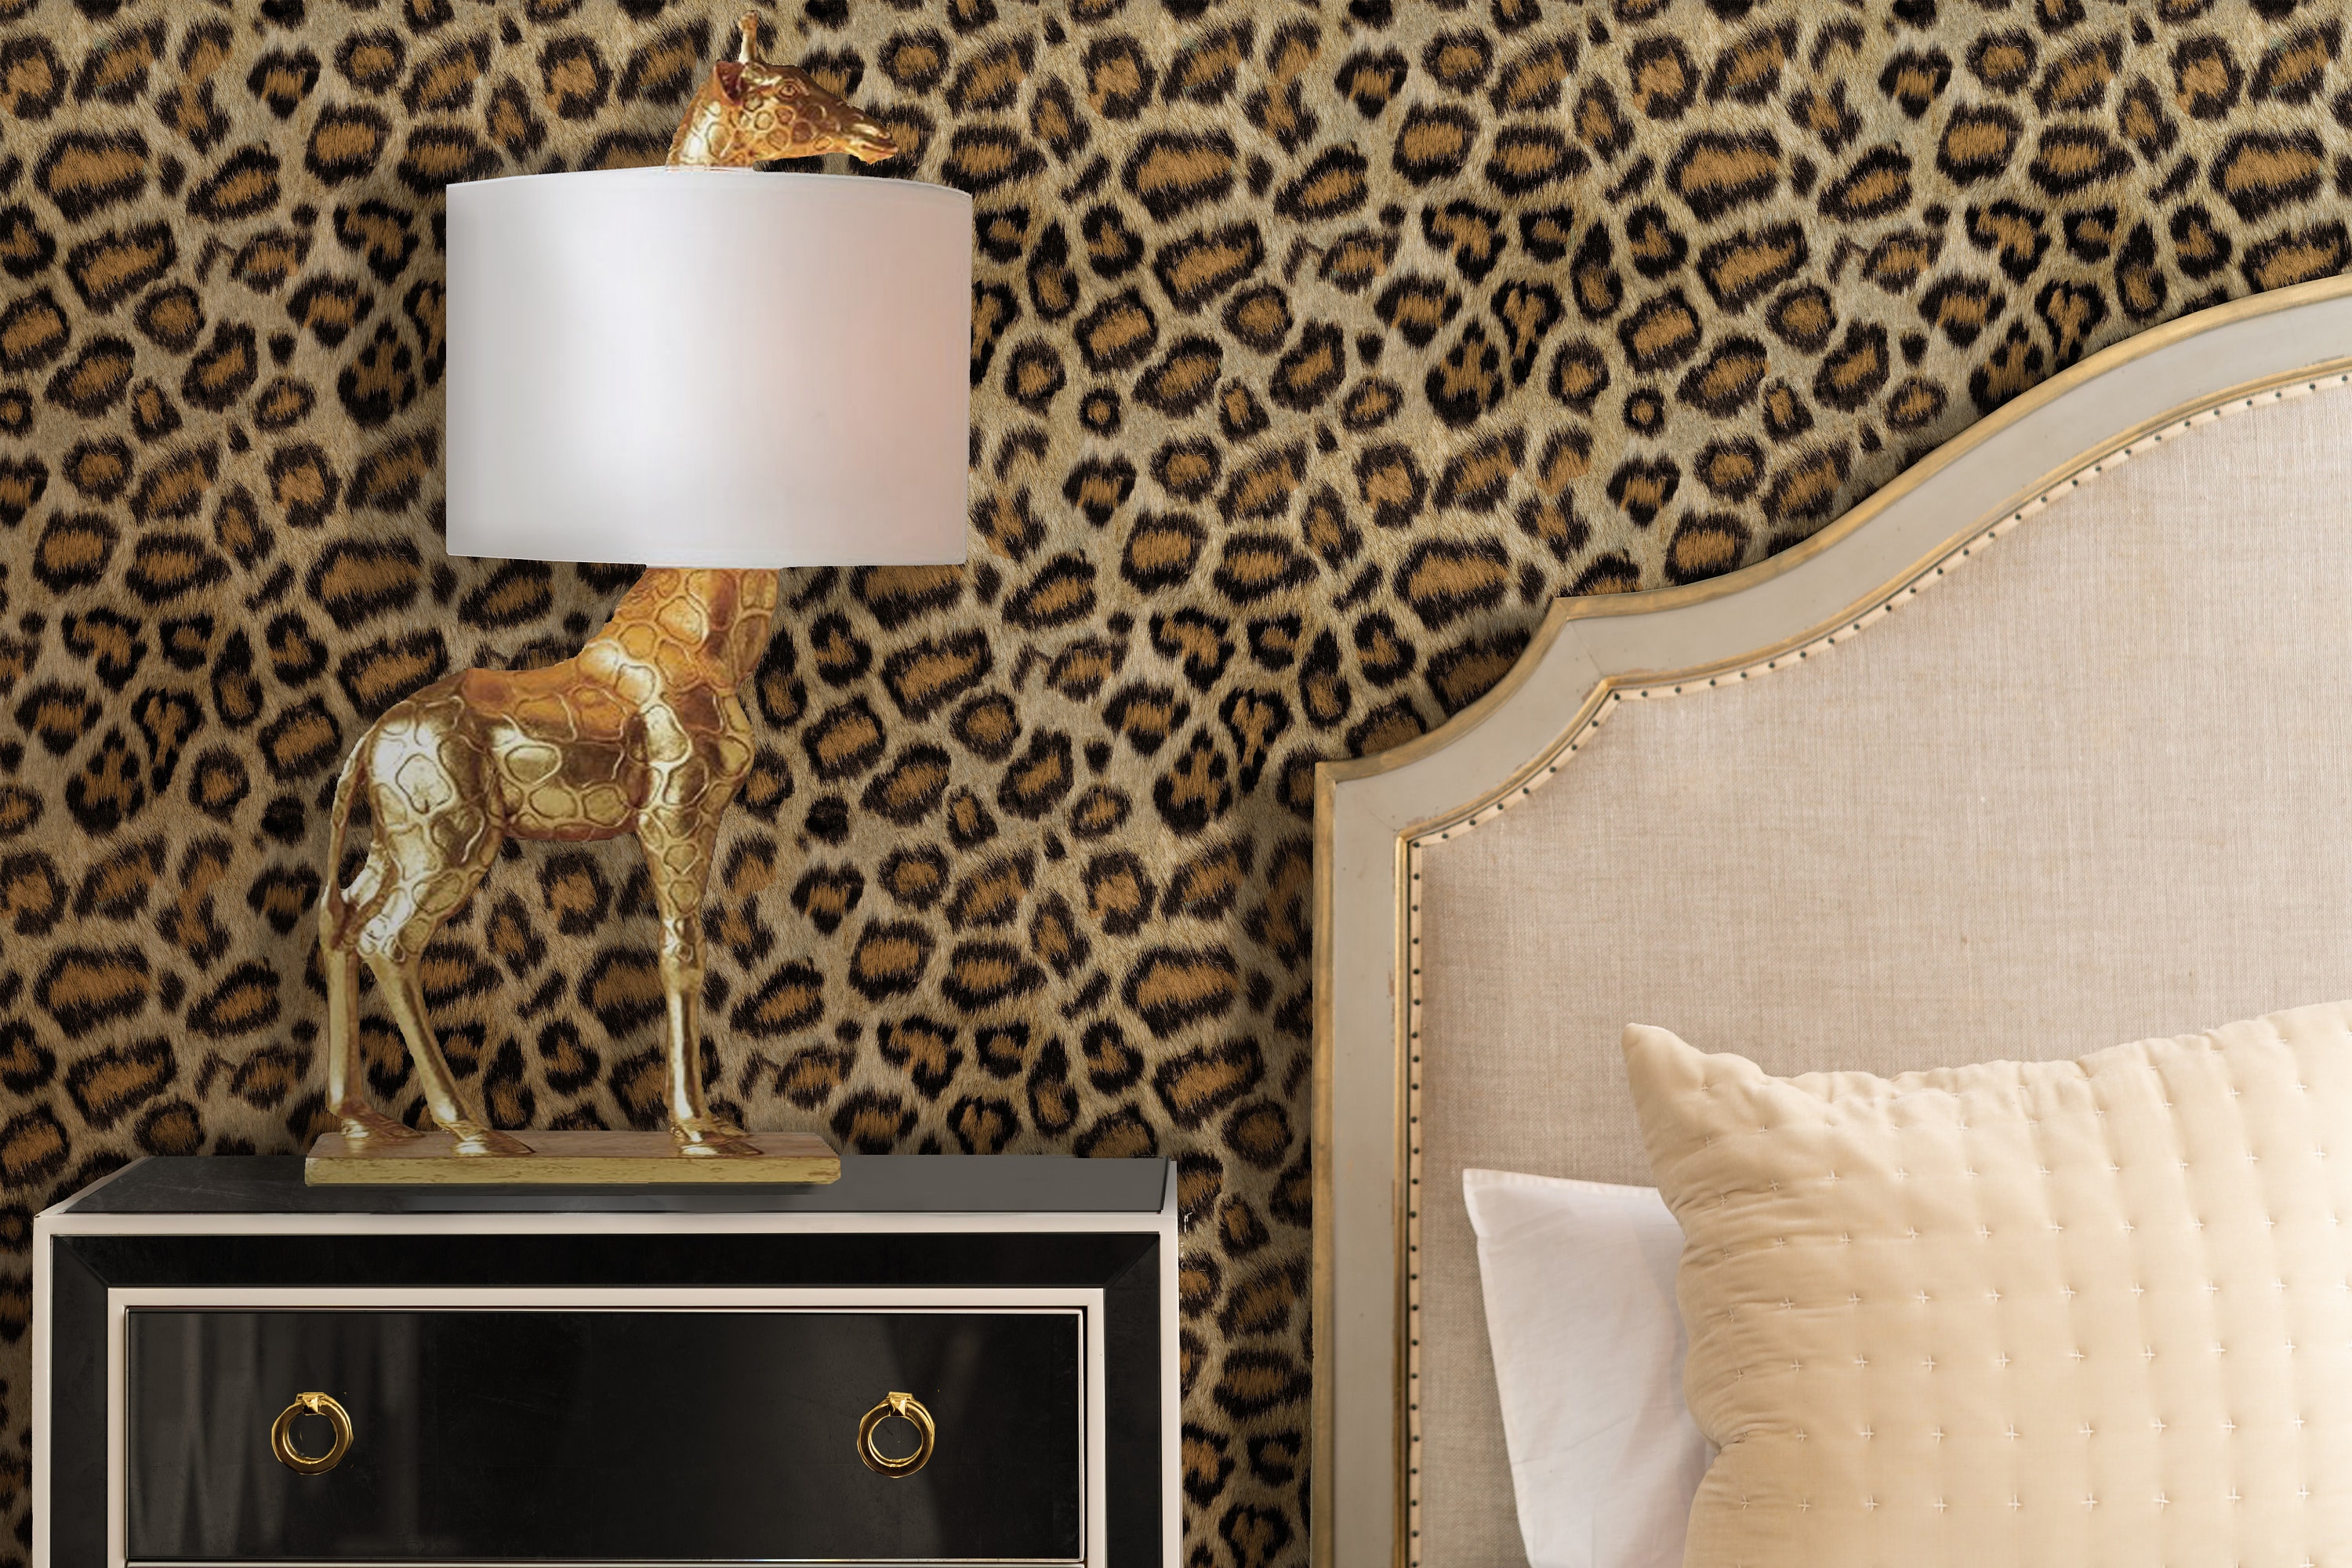 Leopard Print Is My Neutral Removable Peel And Stick Wallpaper